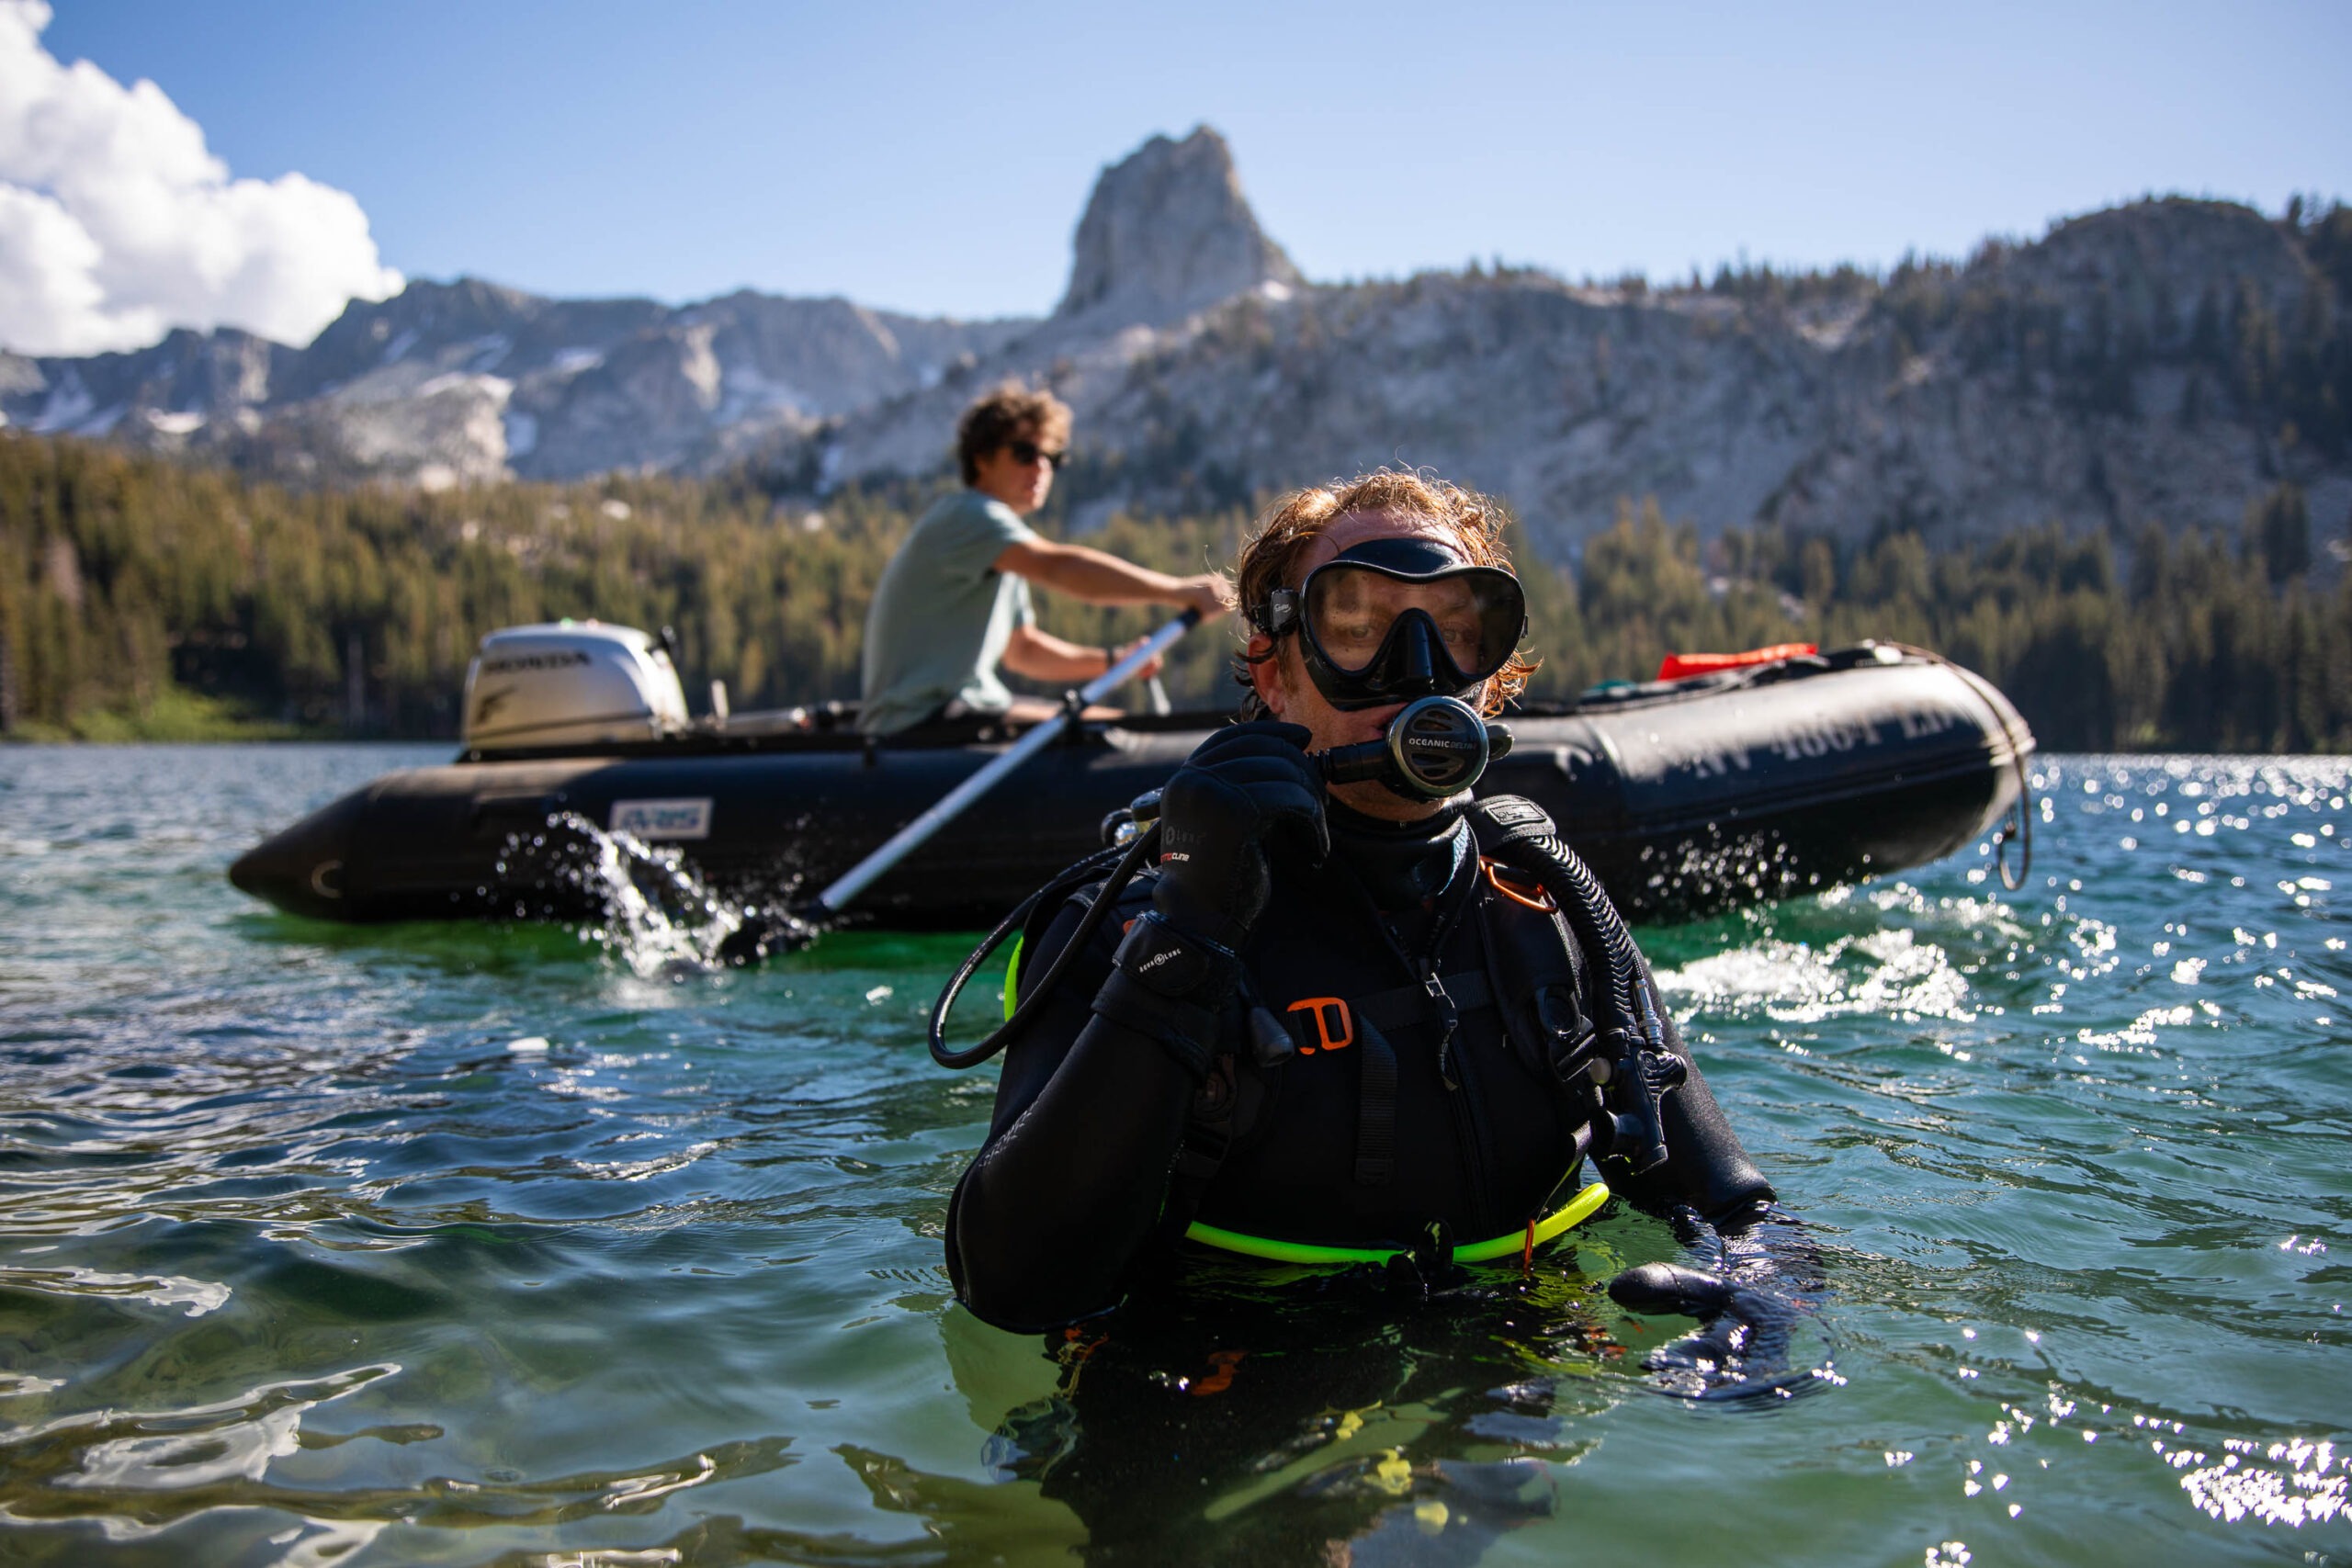 Mammoth Lakes Tourism Invests $100,000 to Preserve Lakes